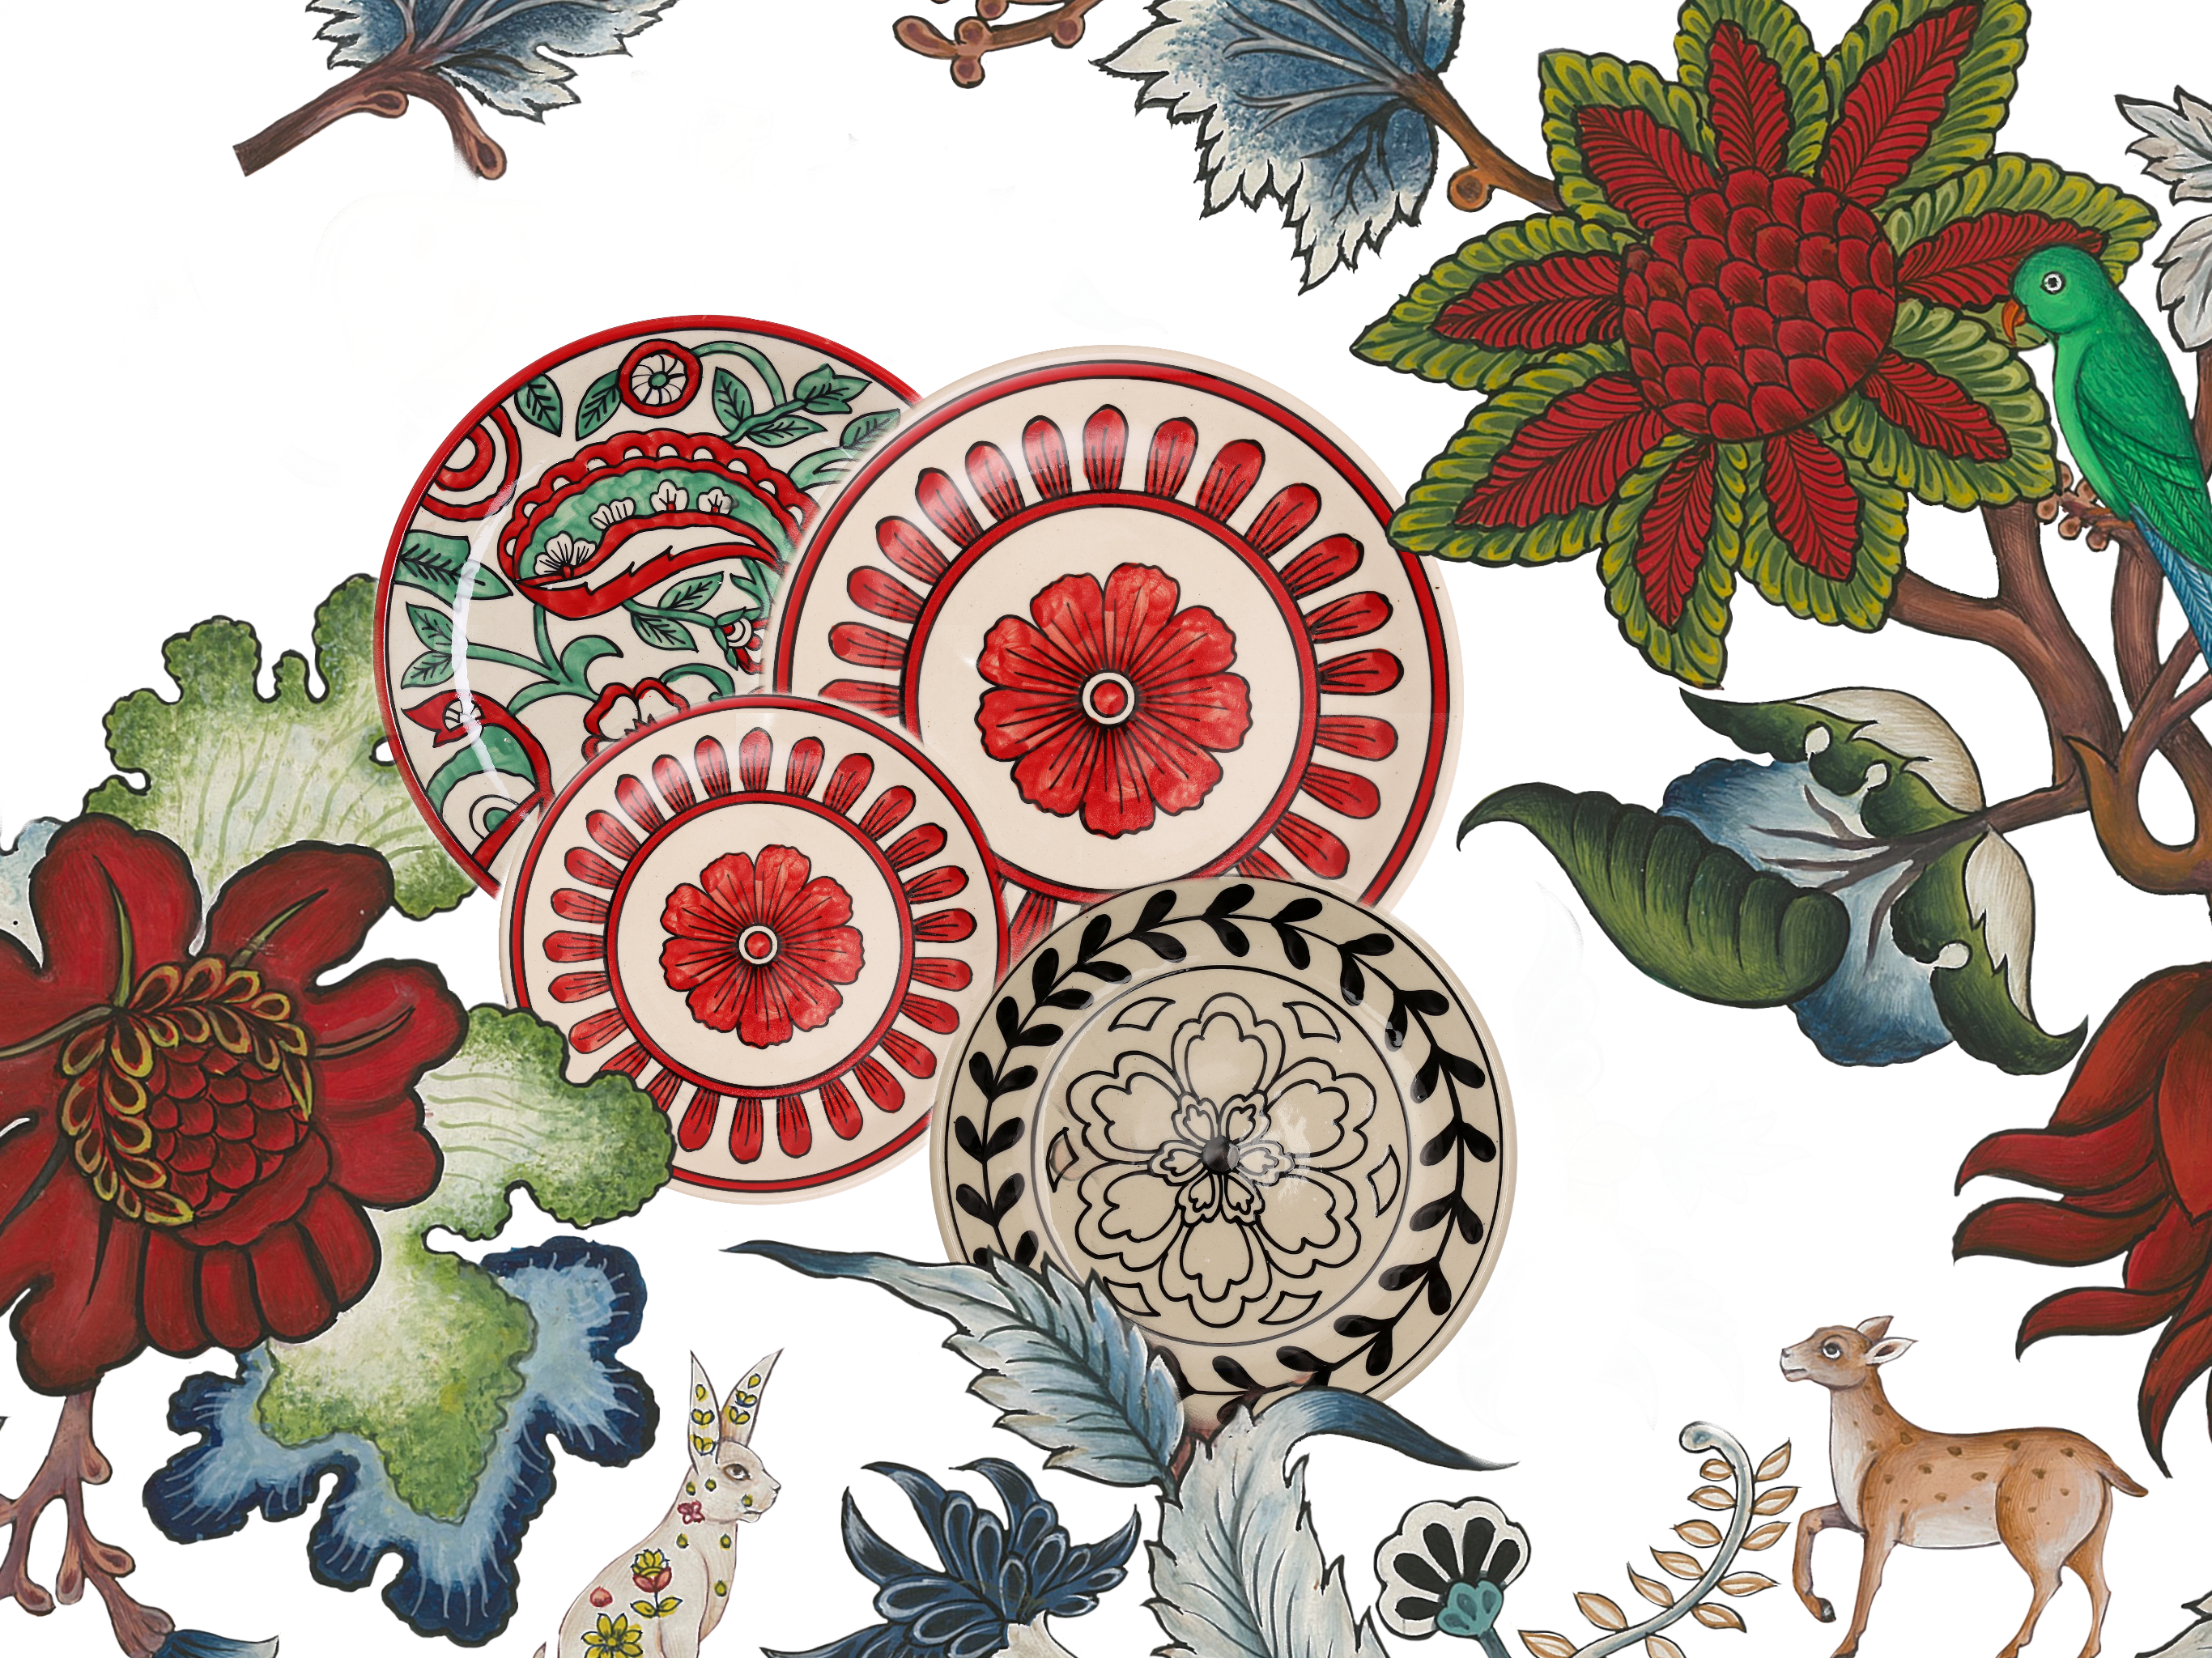 Elevate your holiday tablescape with Bongenie Grieder’s “An Enchanted Christmas” collection